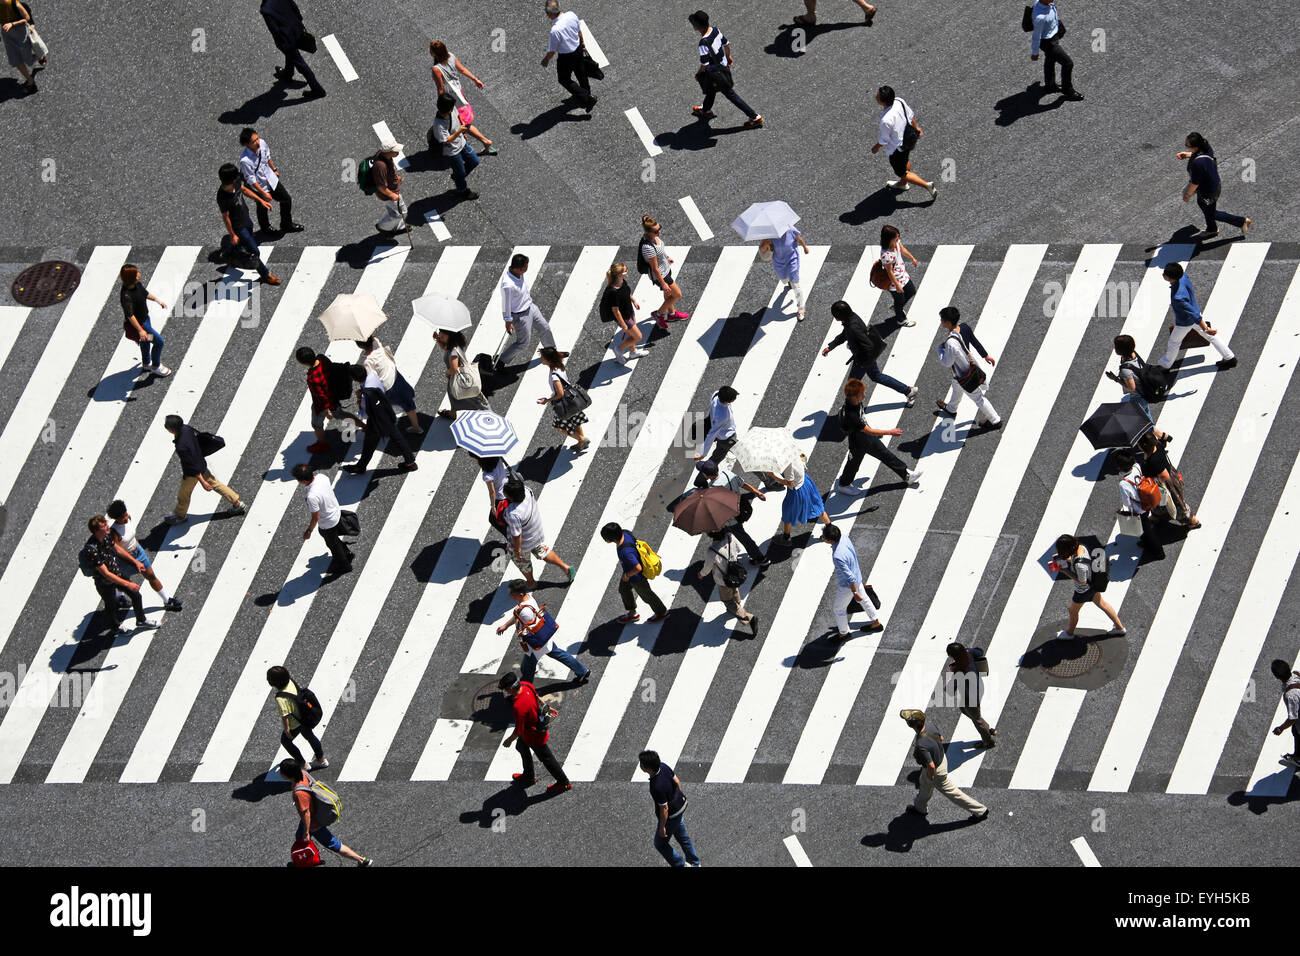 People crossing the pedestrian crossing at the intersection in Shibuya, Tokyo, Japan Stock Photo